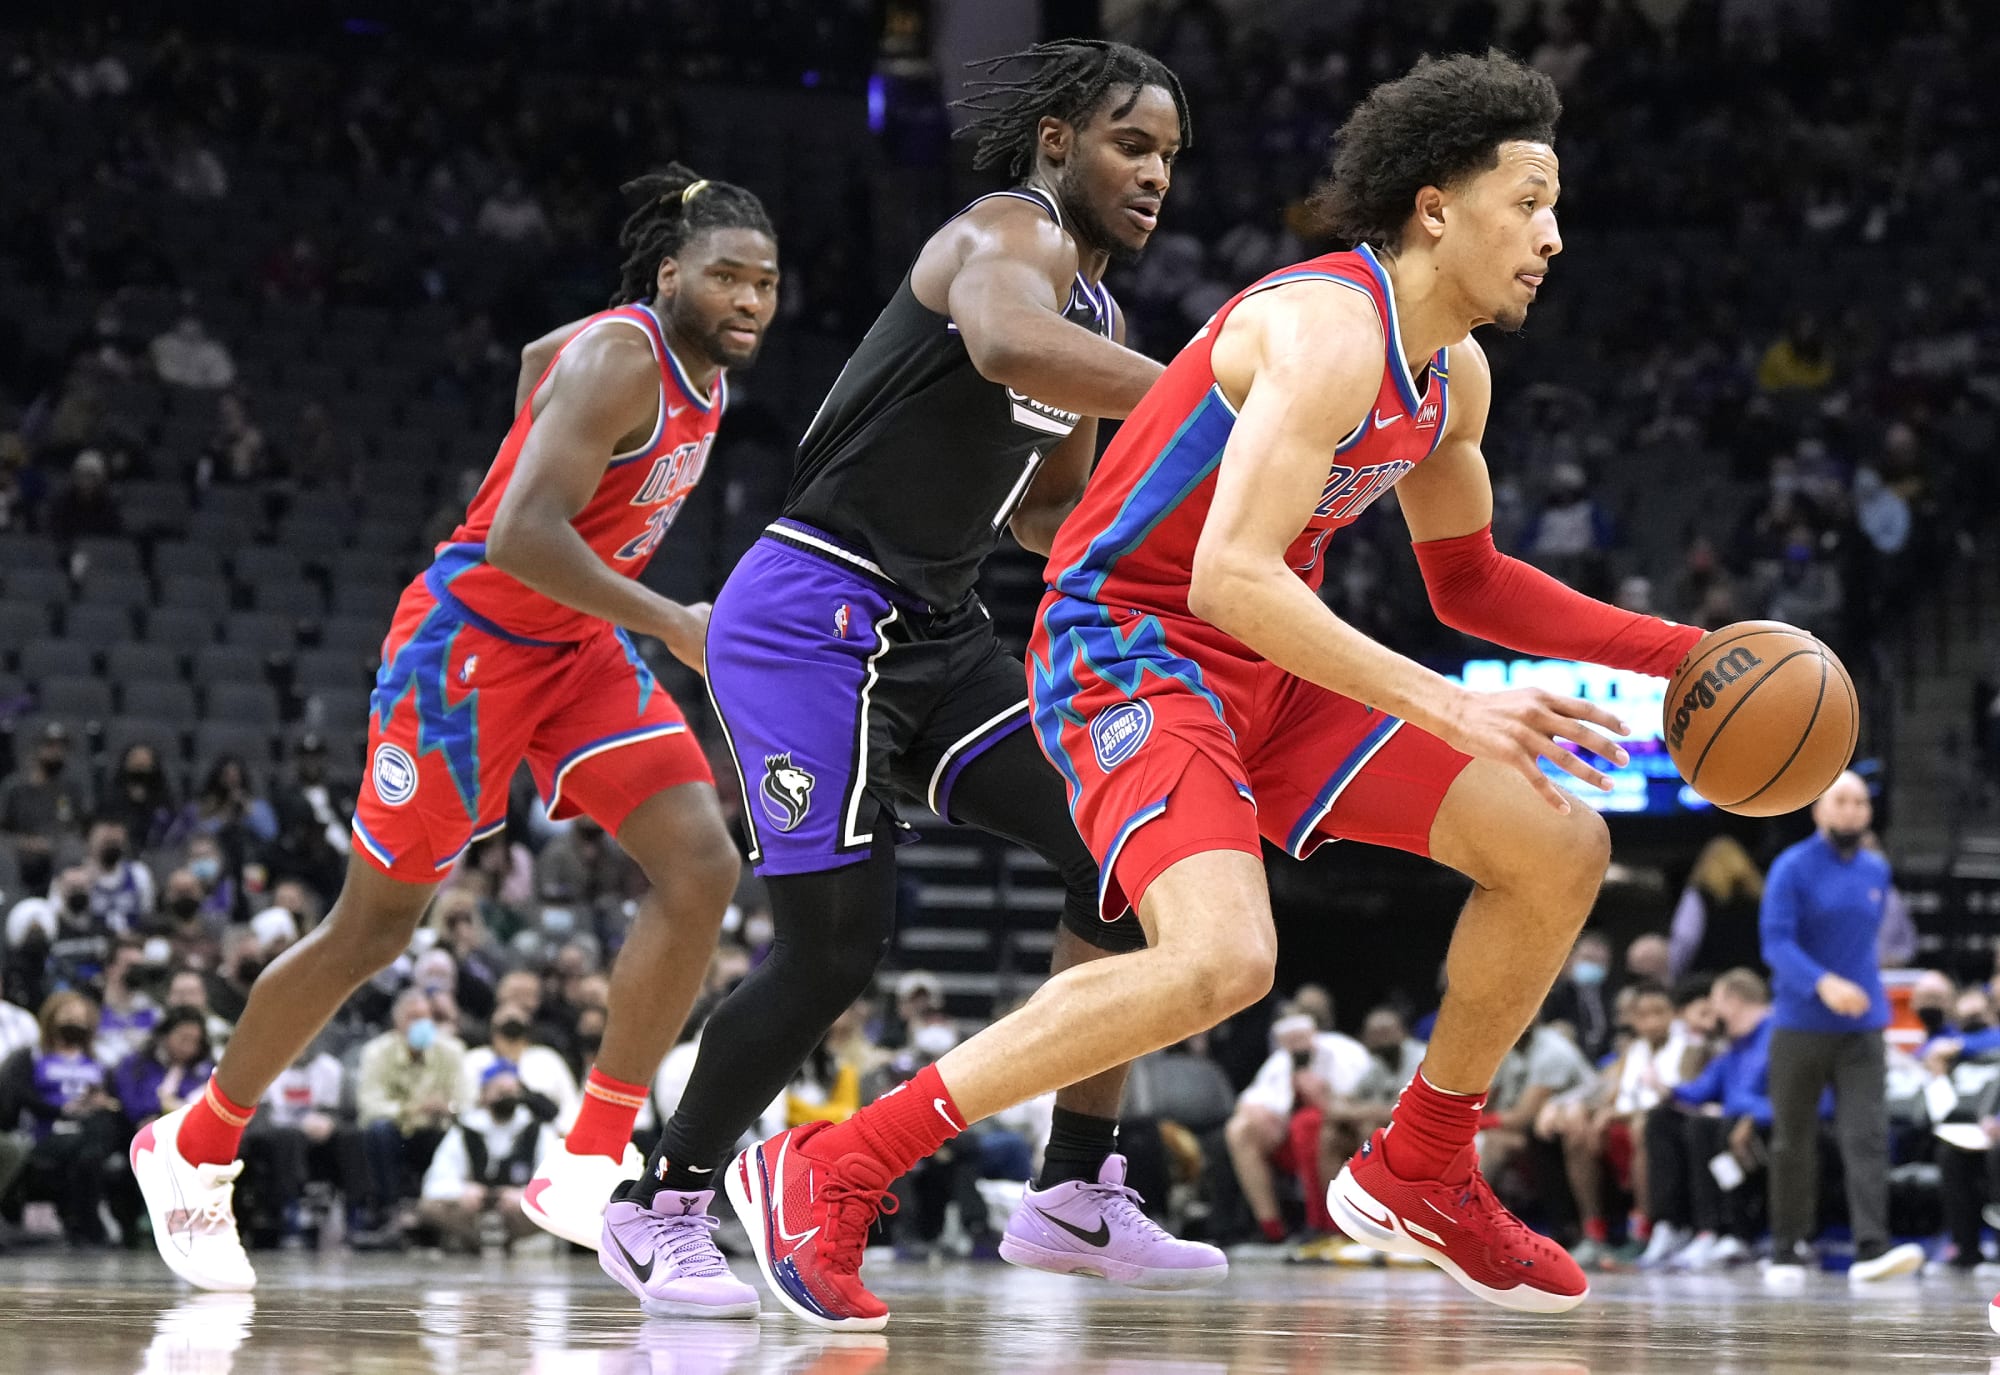 The Kings will likely decide the Detroit Pistons' draft pick